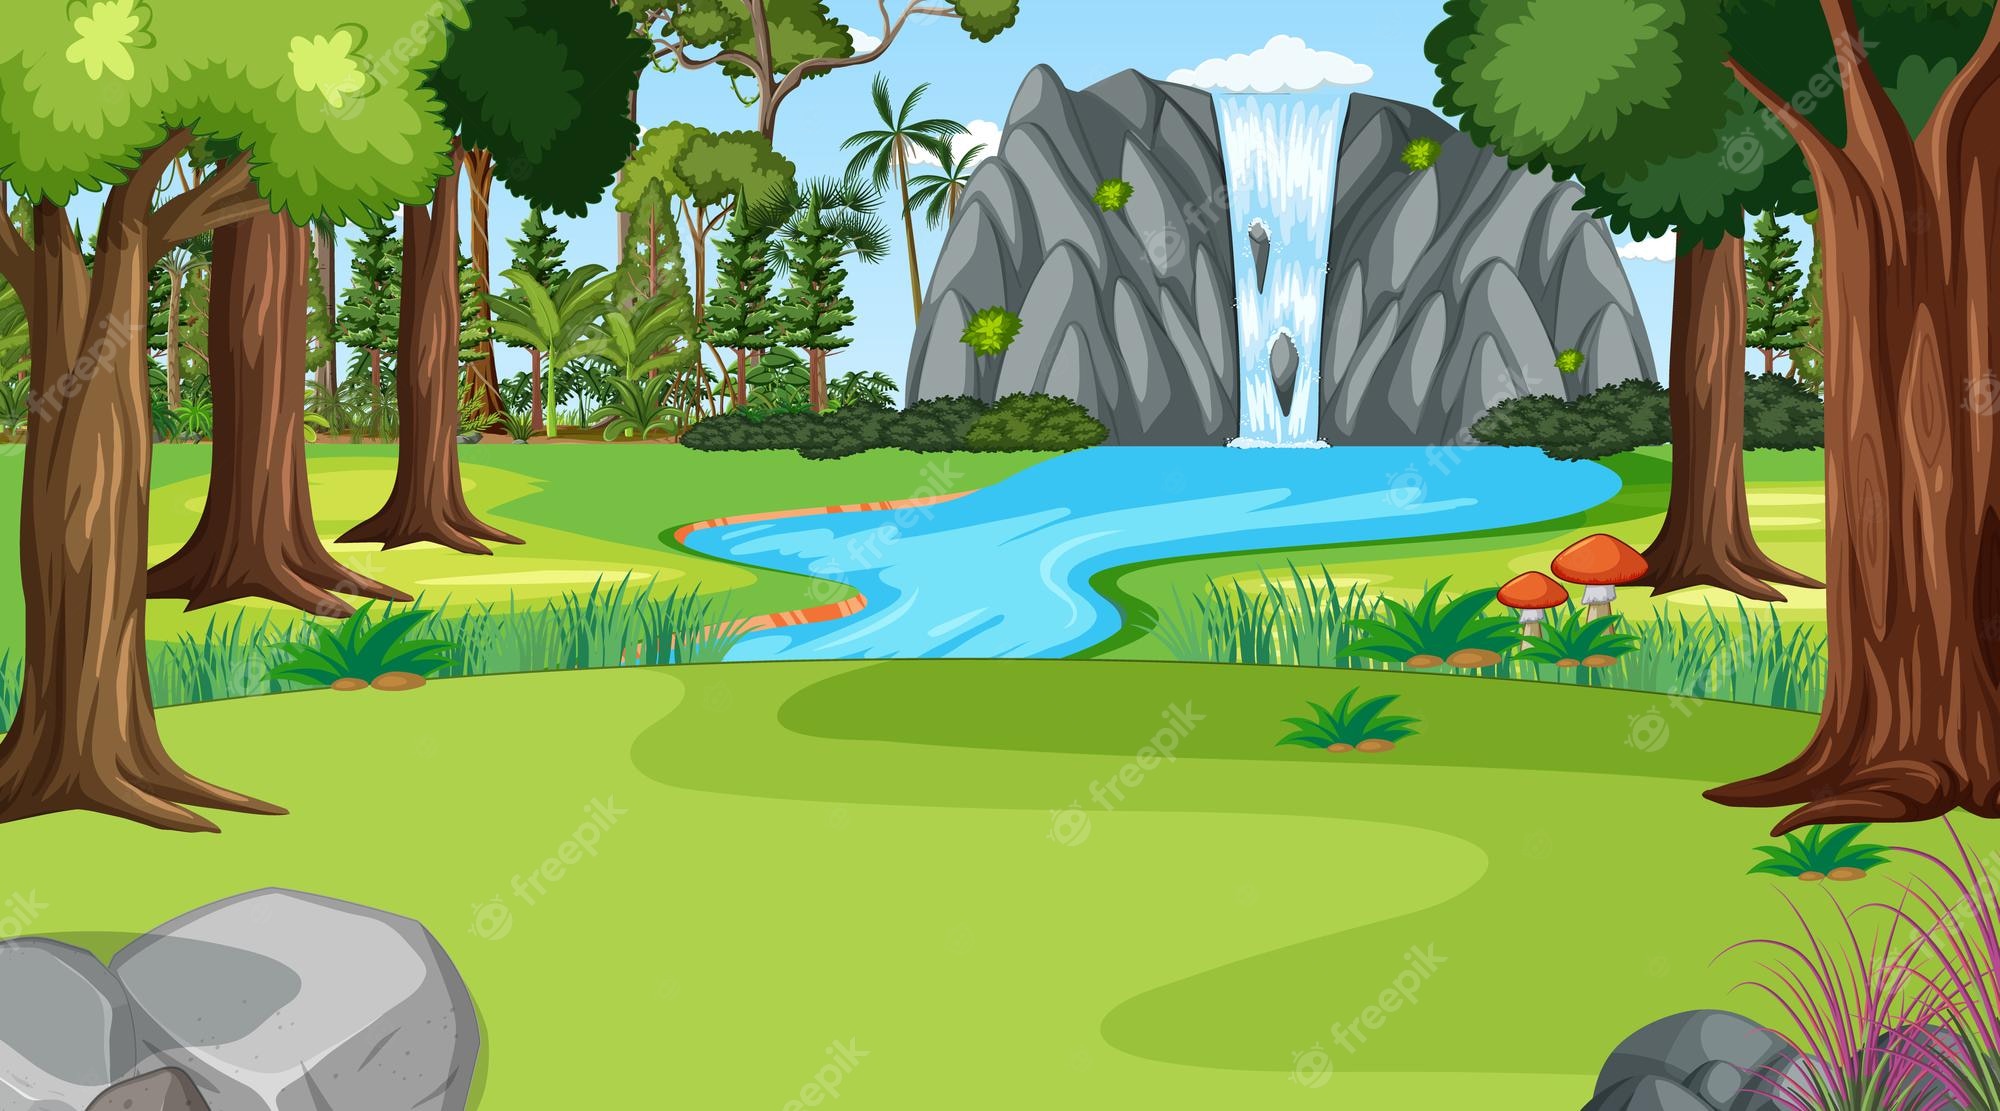 147 007 Nature Clipart Vector Images Depositphotos Clip Art Library